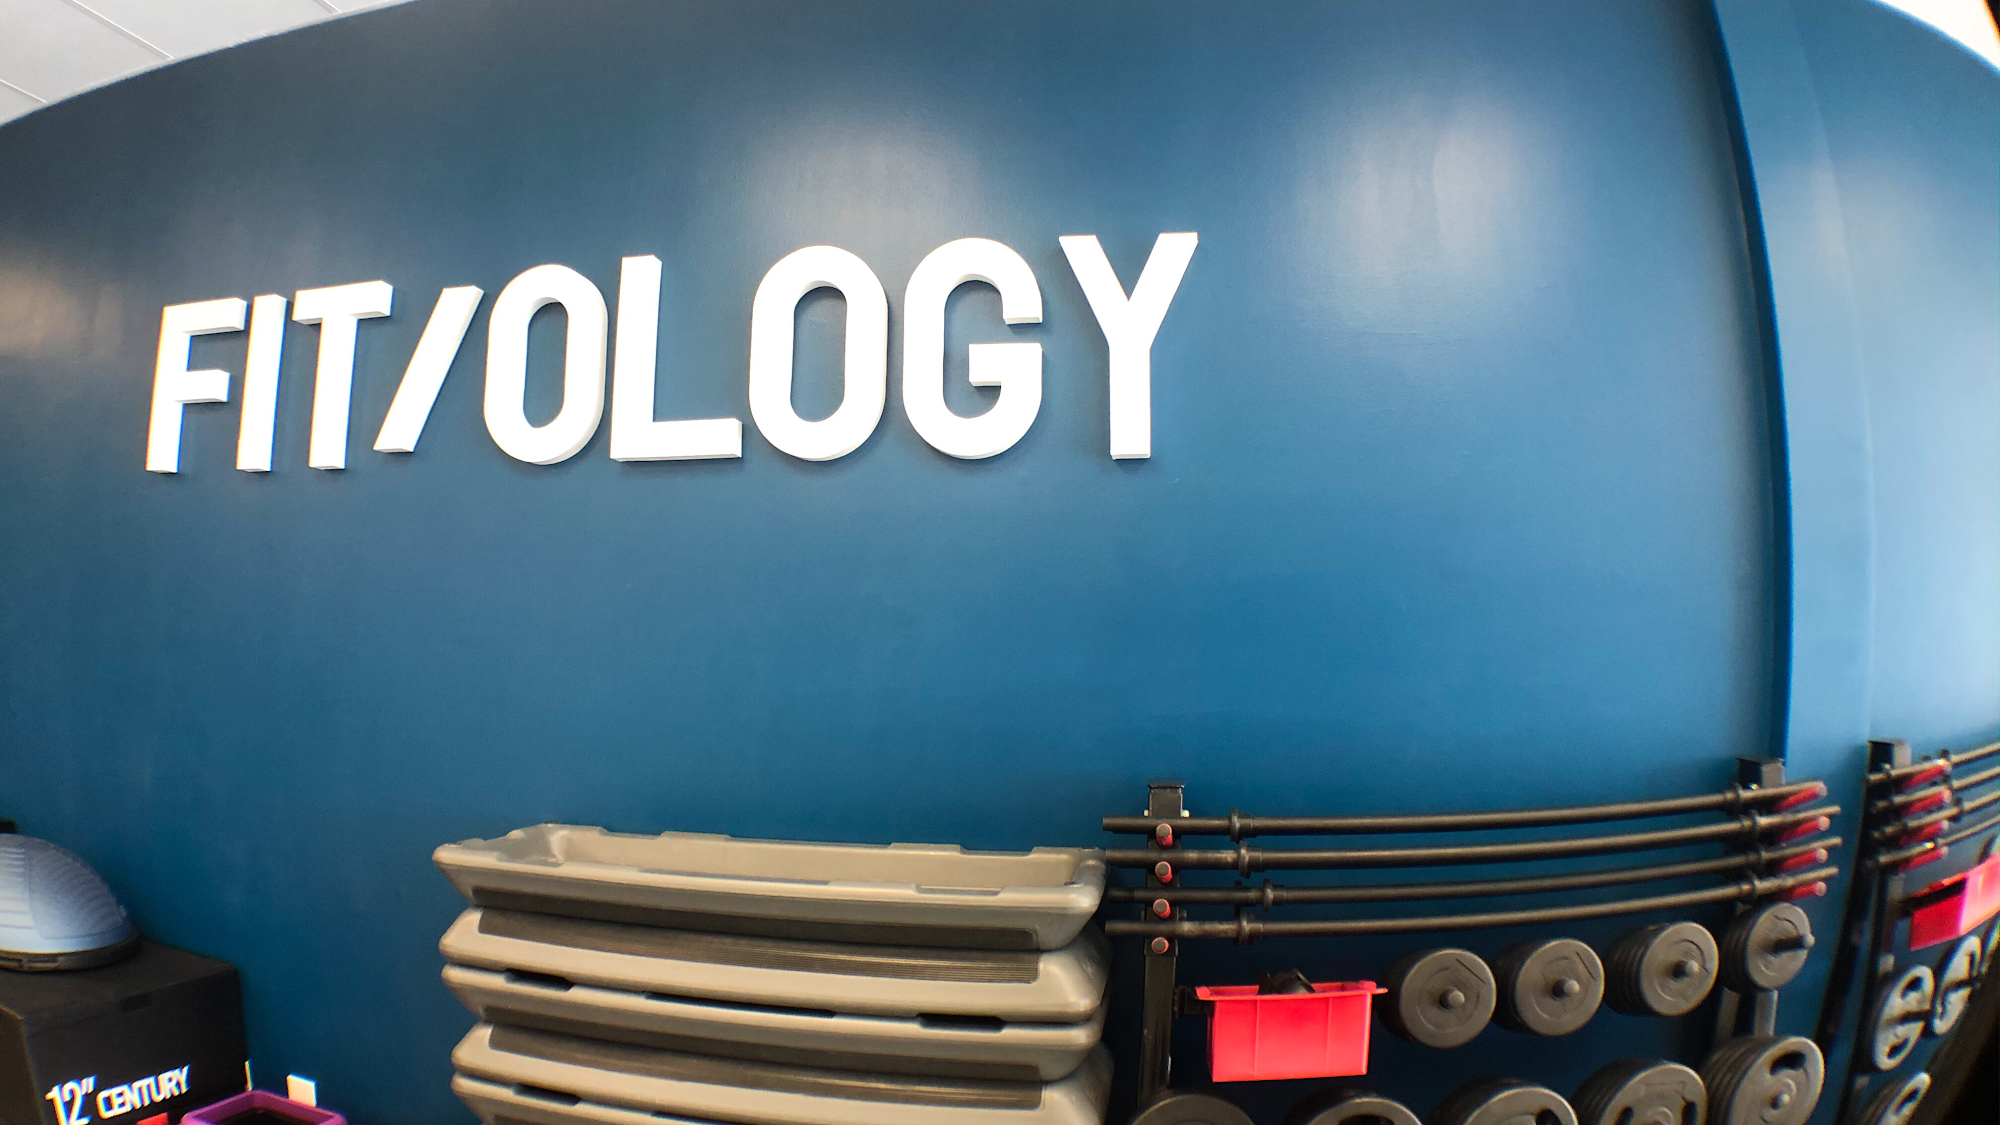 FIT/ology Fitness Boutique